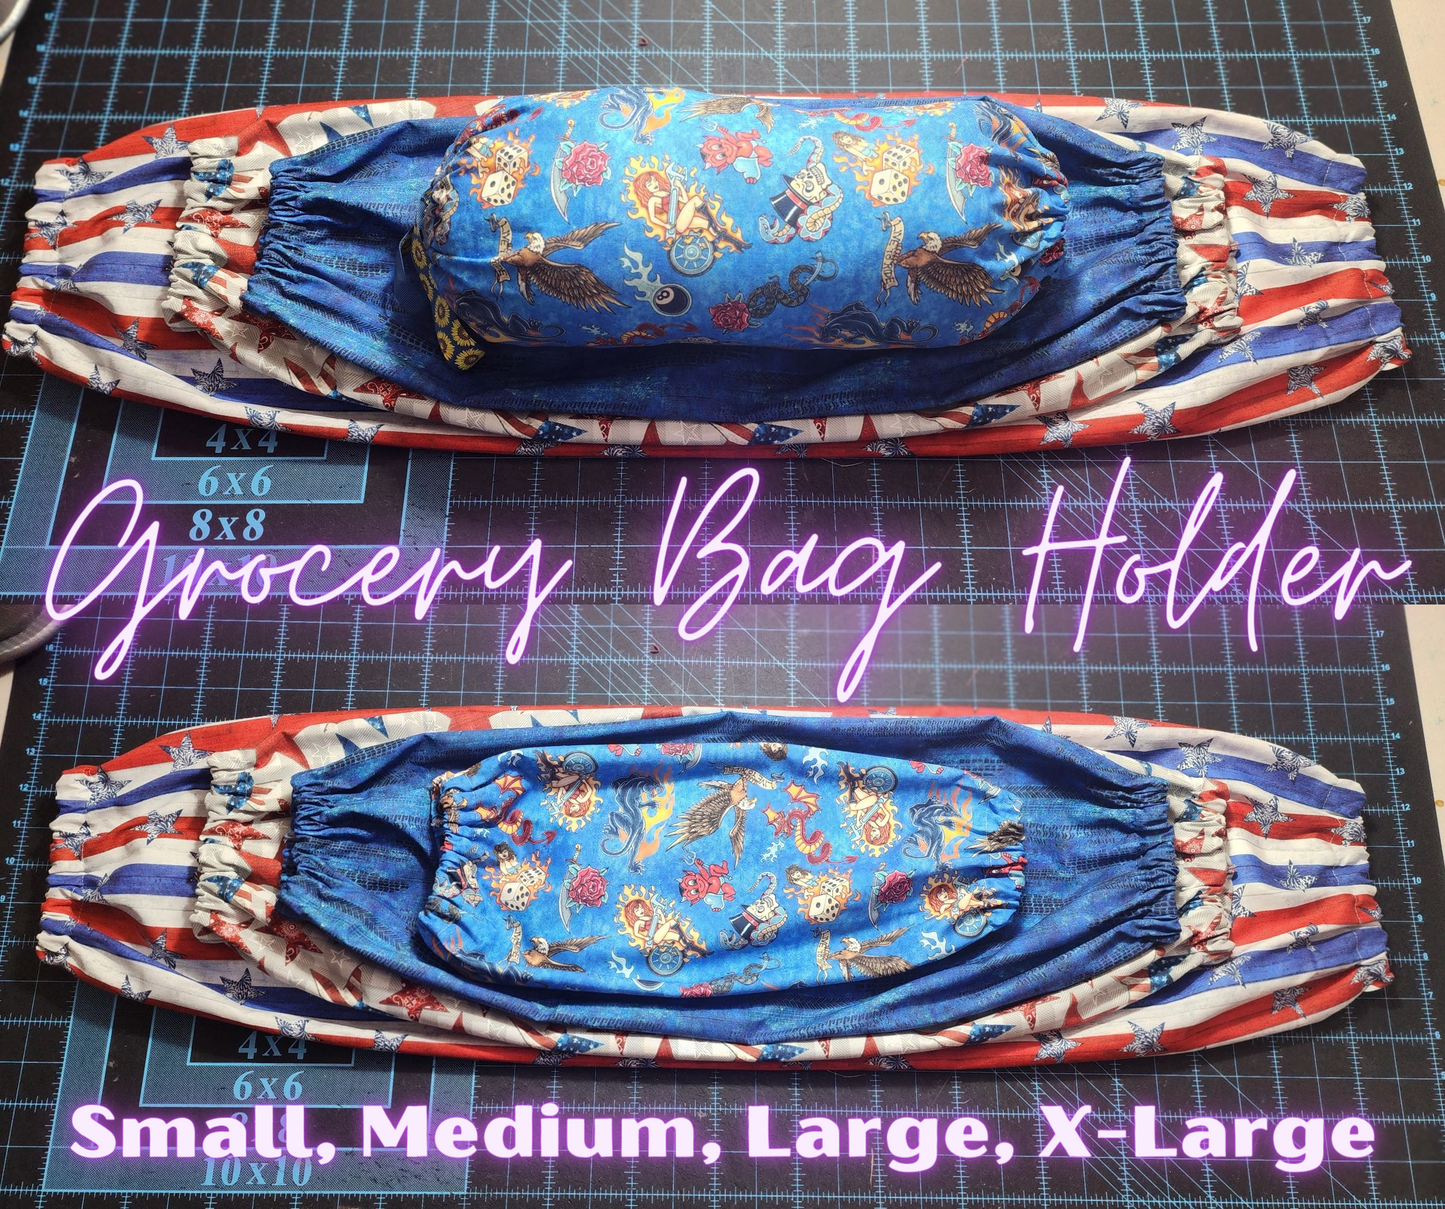 Sparkplug on Red, SMALL Grocery Bag Holder | Pre-cut just needs sewn together